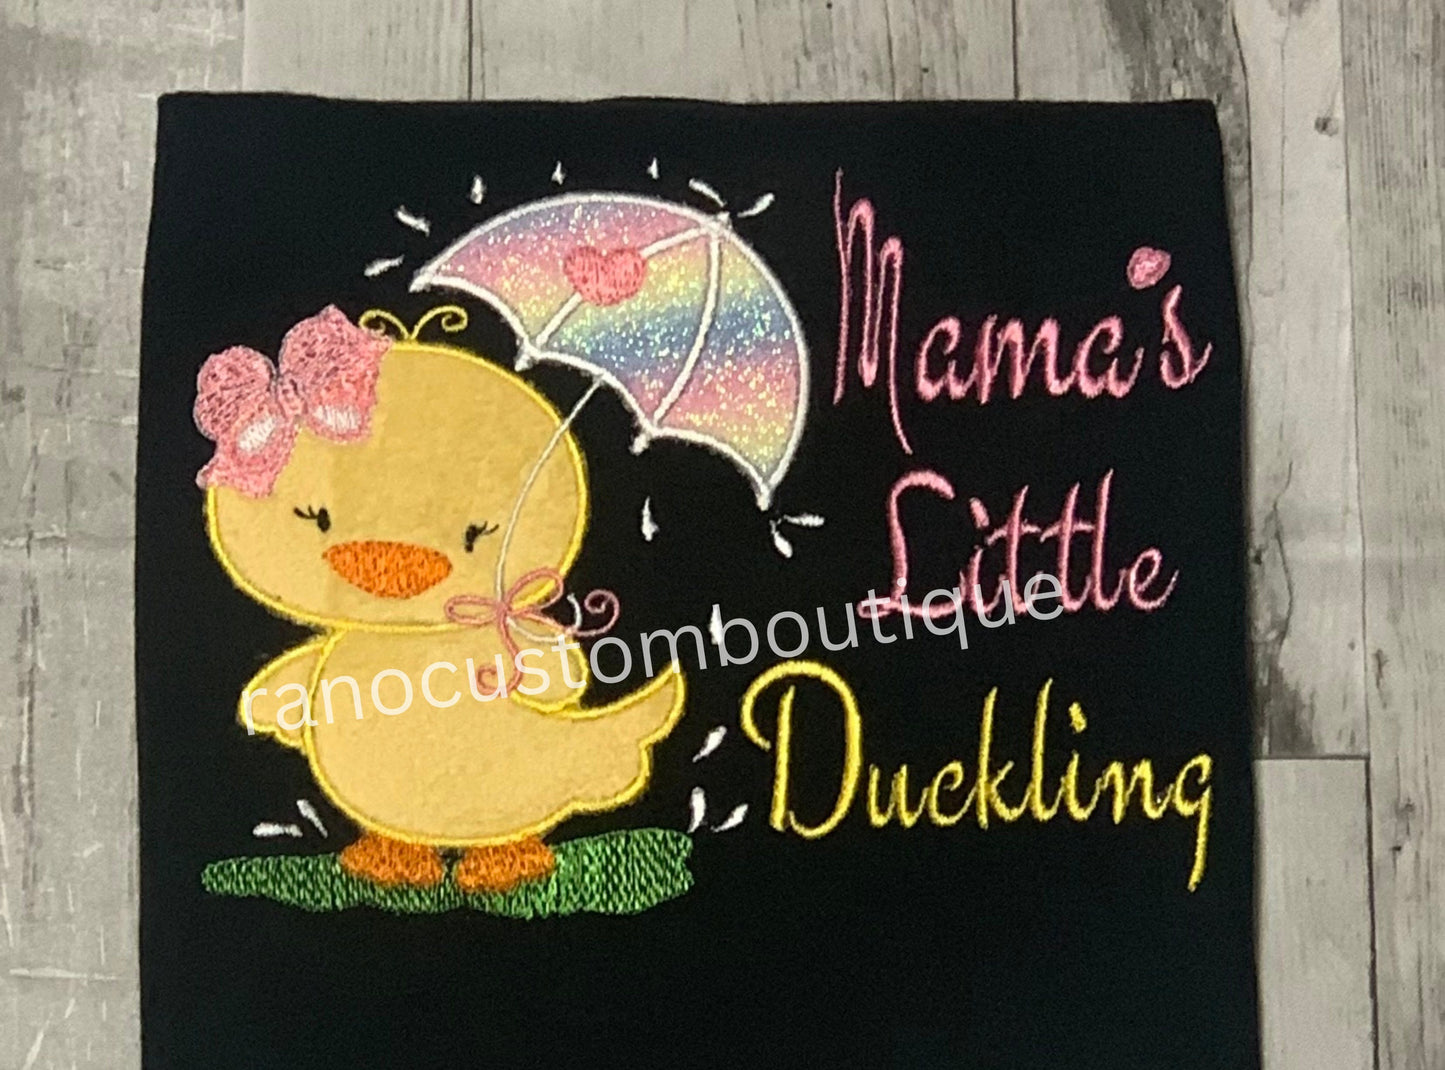 Embroidered Duckling Girl Shirt, Embroidered Girls Clothing, Embroidered Little Duckling Design